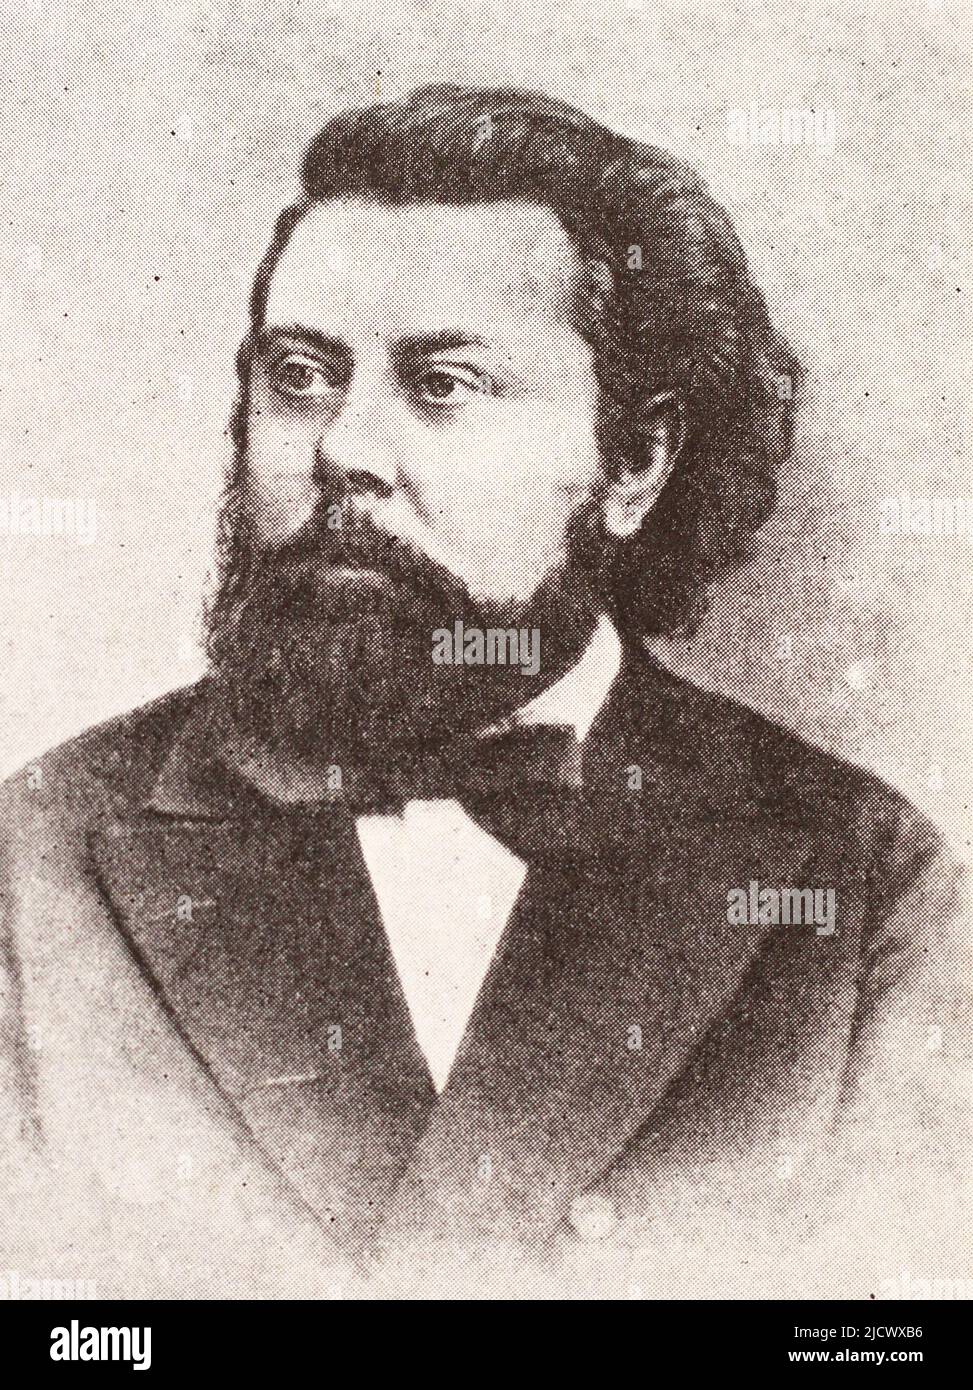 Photo portrait of Modest Mussorgsky. Modest Petrovich Mussorgsky (1839 – 1881) was a Russian composer, one of the group known as 'The Five'. He was an innovator of Russian music in the Romantic period. He strove to achieve a uniquely Russian musical identity, often in deliberate defiance of the established conventions of Western music. Stock Photo